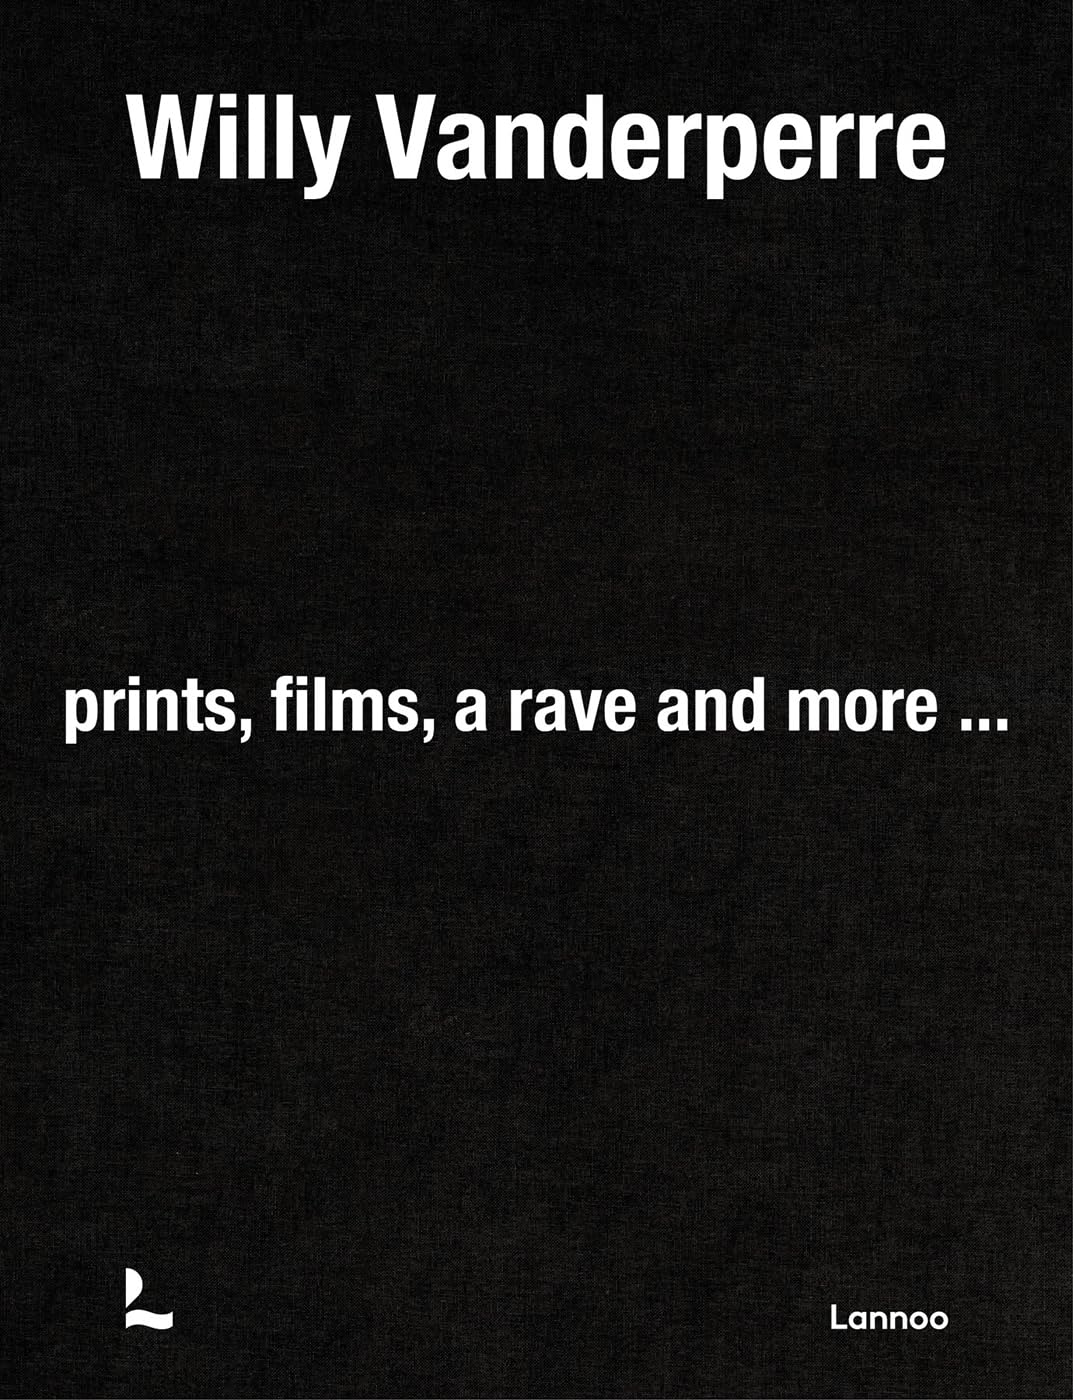 Willy Vanderperre. Prints, films, a rave and more...